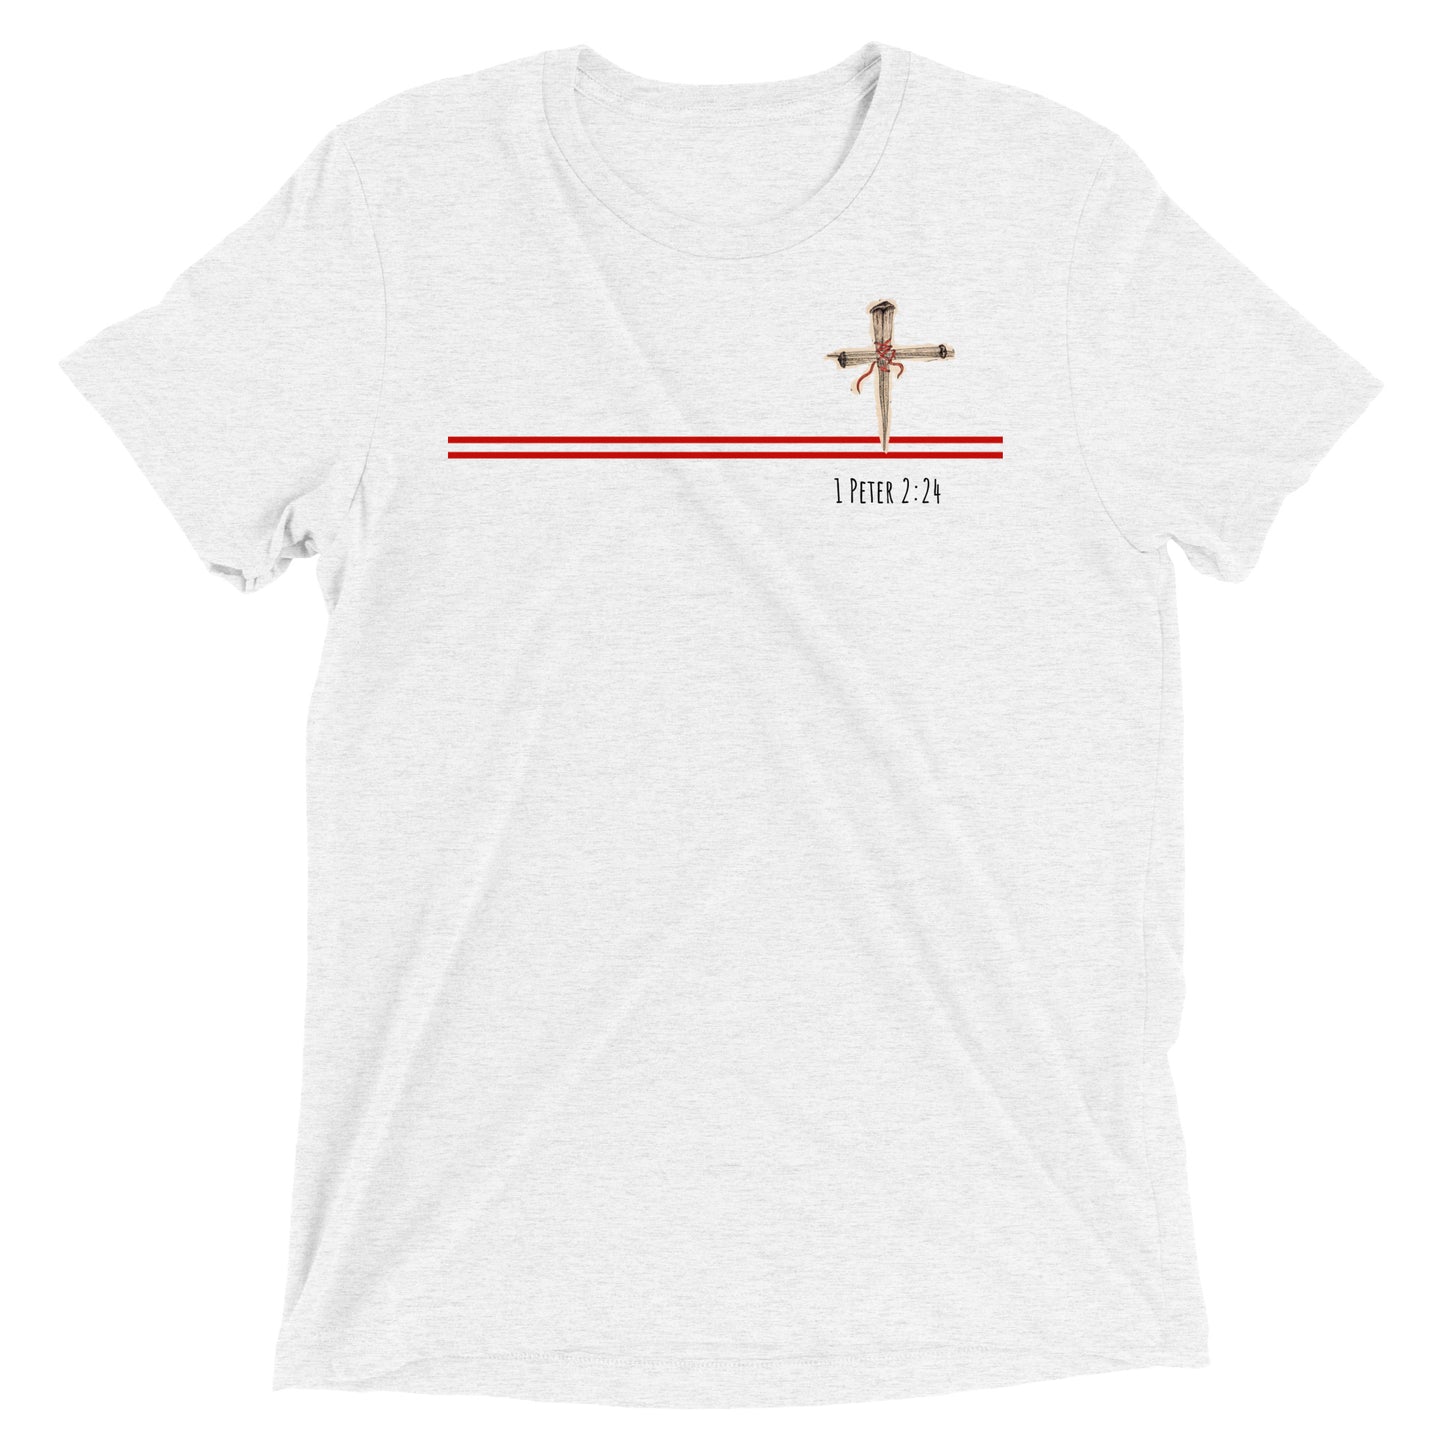 God Said - "By My Wounds you are Healed" Short sleeve t-shirt